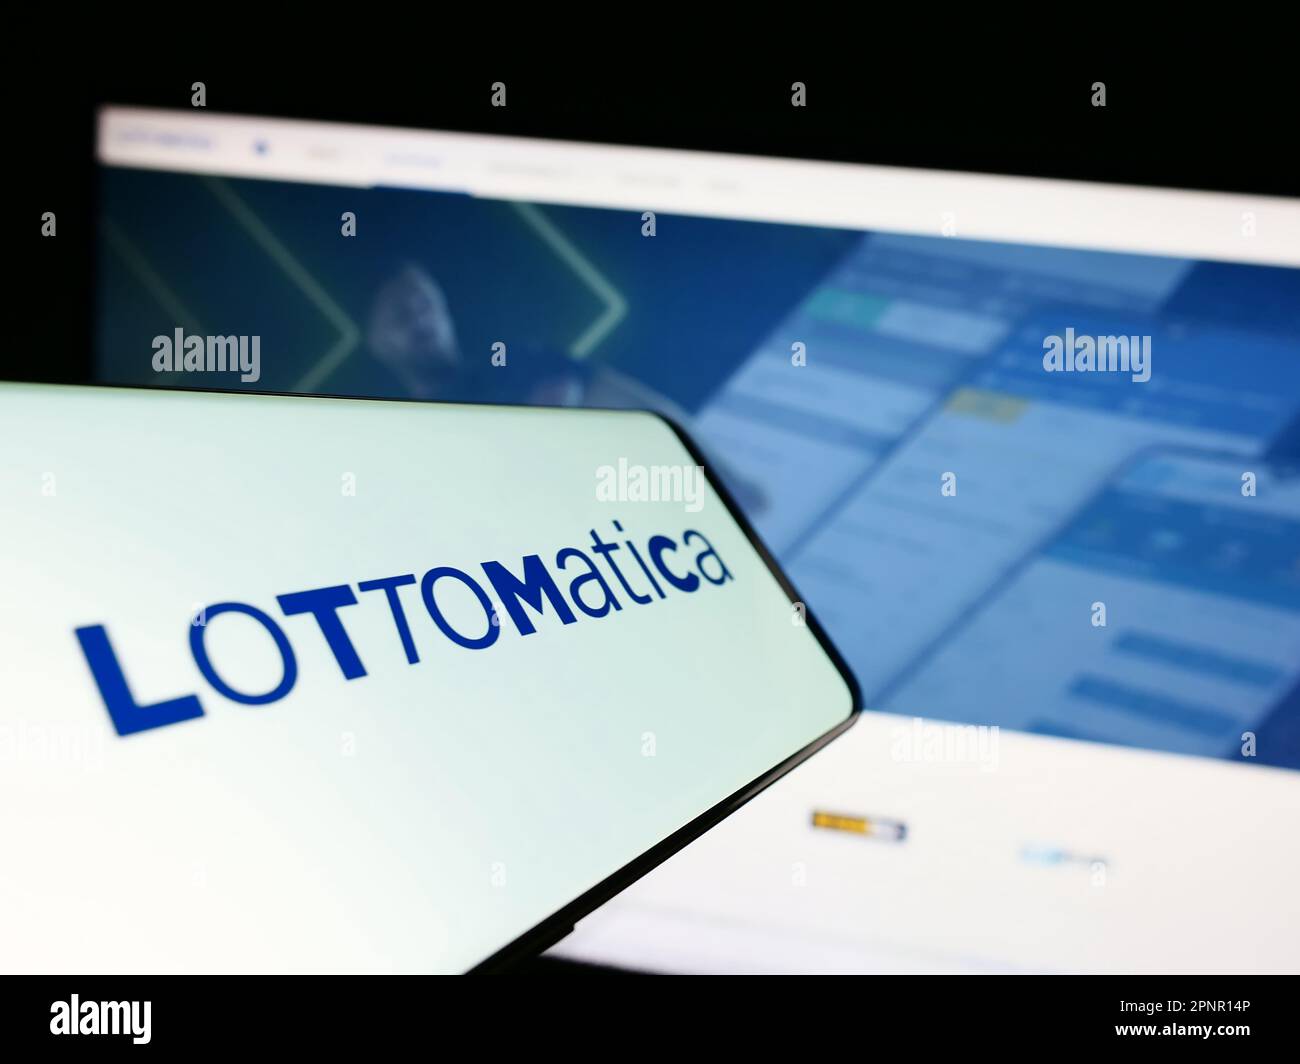 Cellphone with logo of Italian gambling company Lottomatica S.p.A. on screen in front of website. Focus on center-right of phone display. Stock Photo